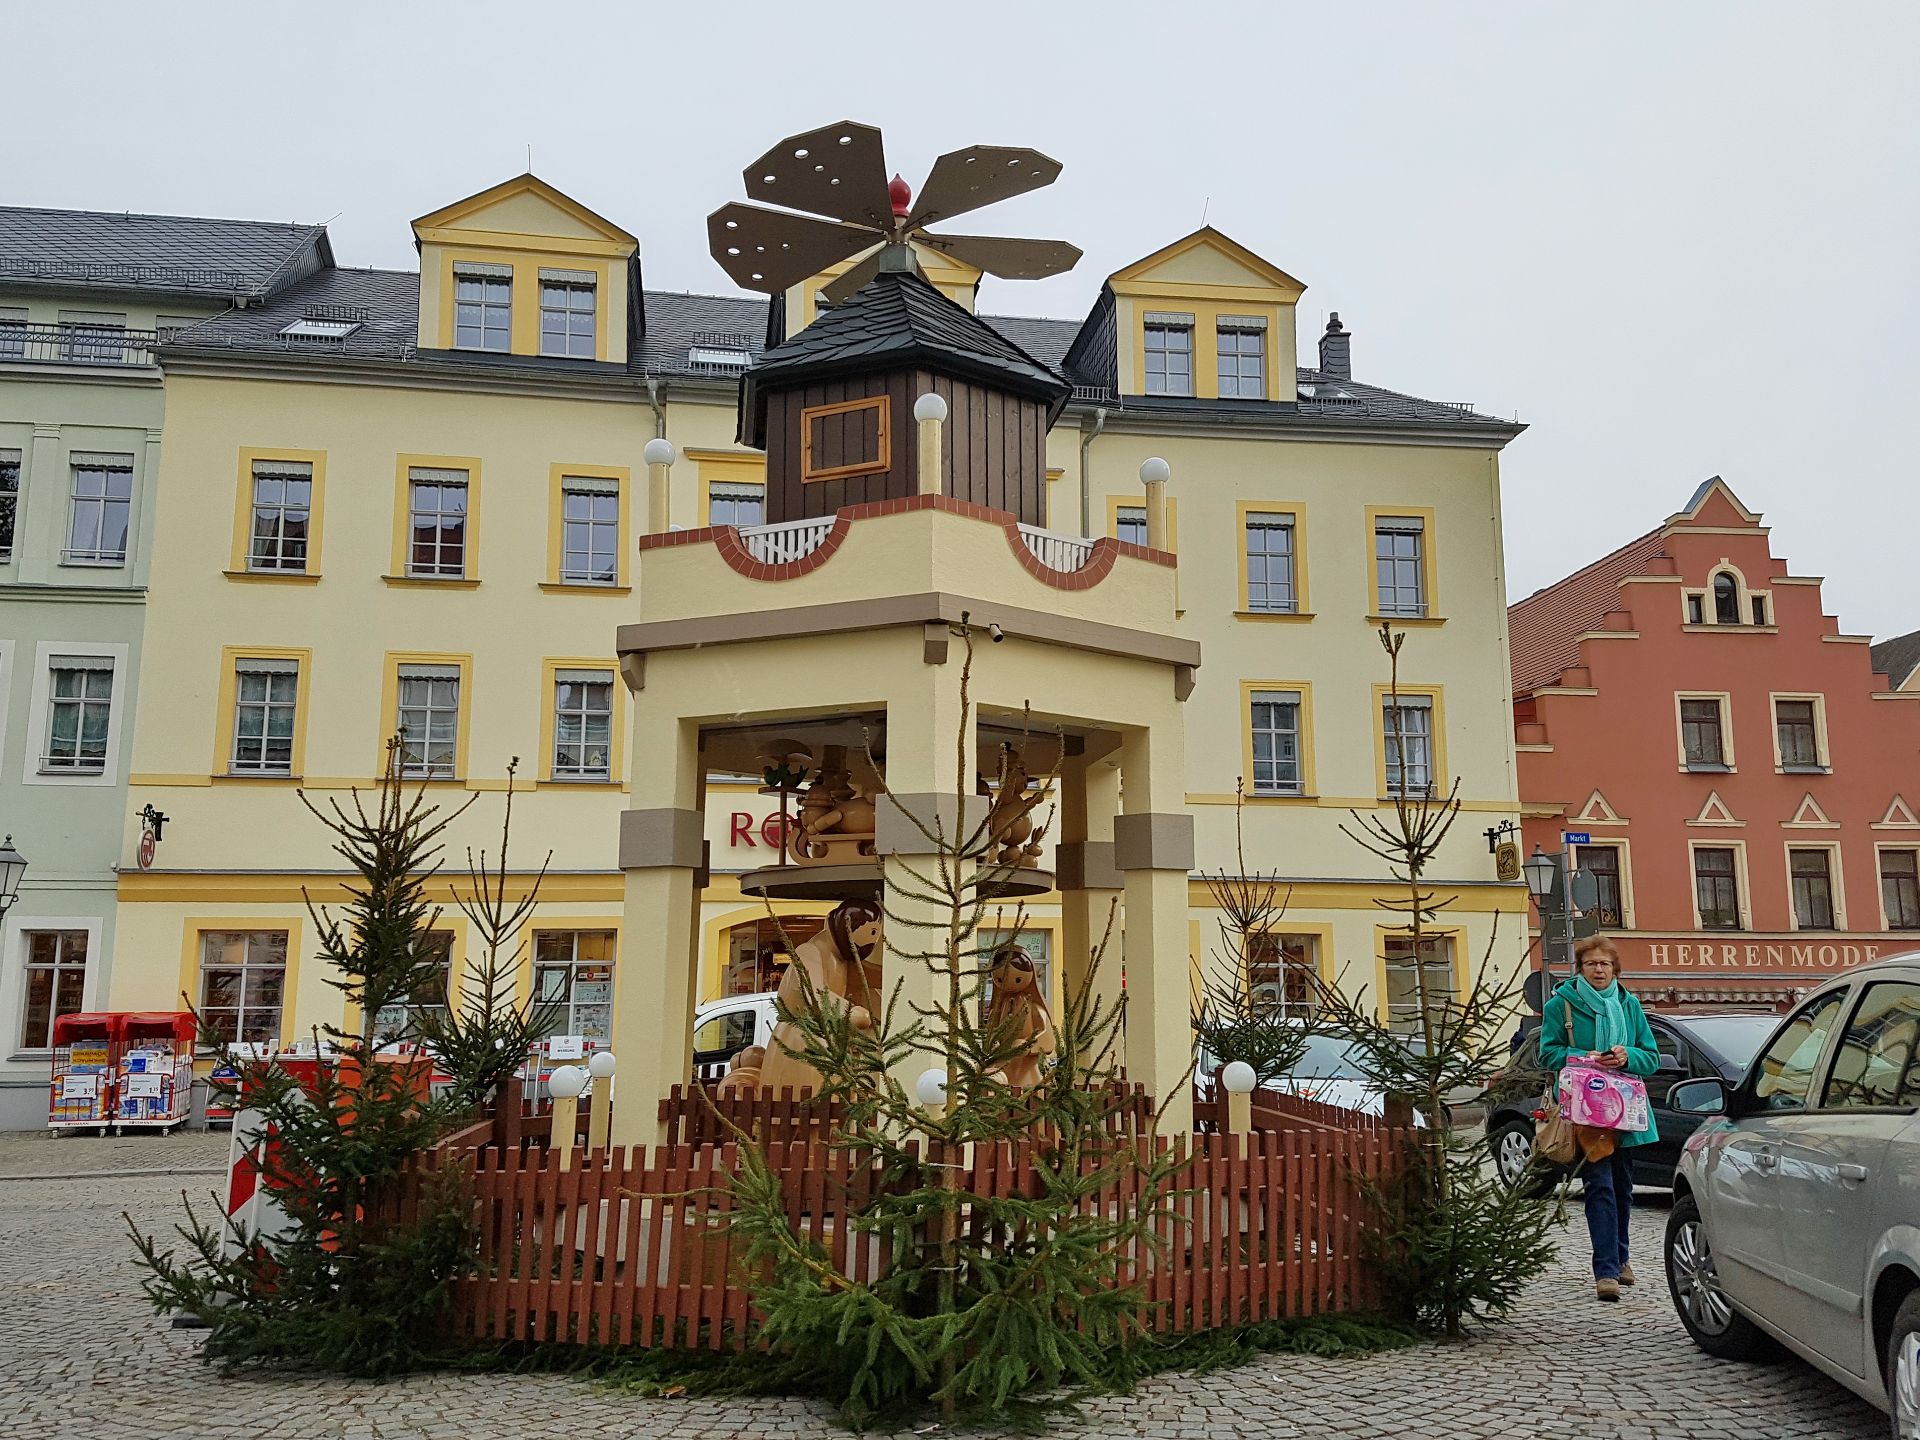 FREEHOLD MULTI APARTMENT BLOCK IN THE HISTORIC TOWN OF HAINICHEN, GERMANY - Image 42 of 51